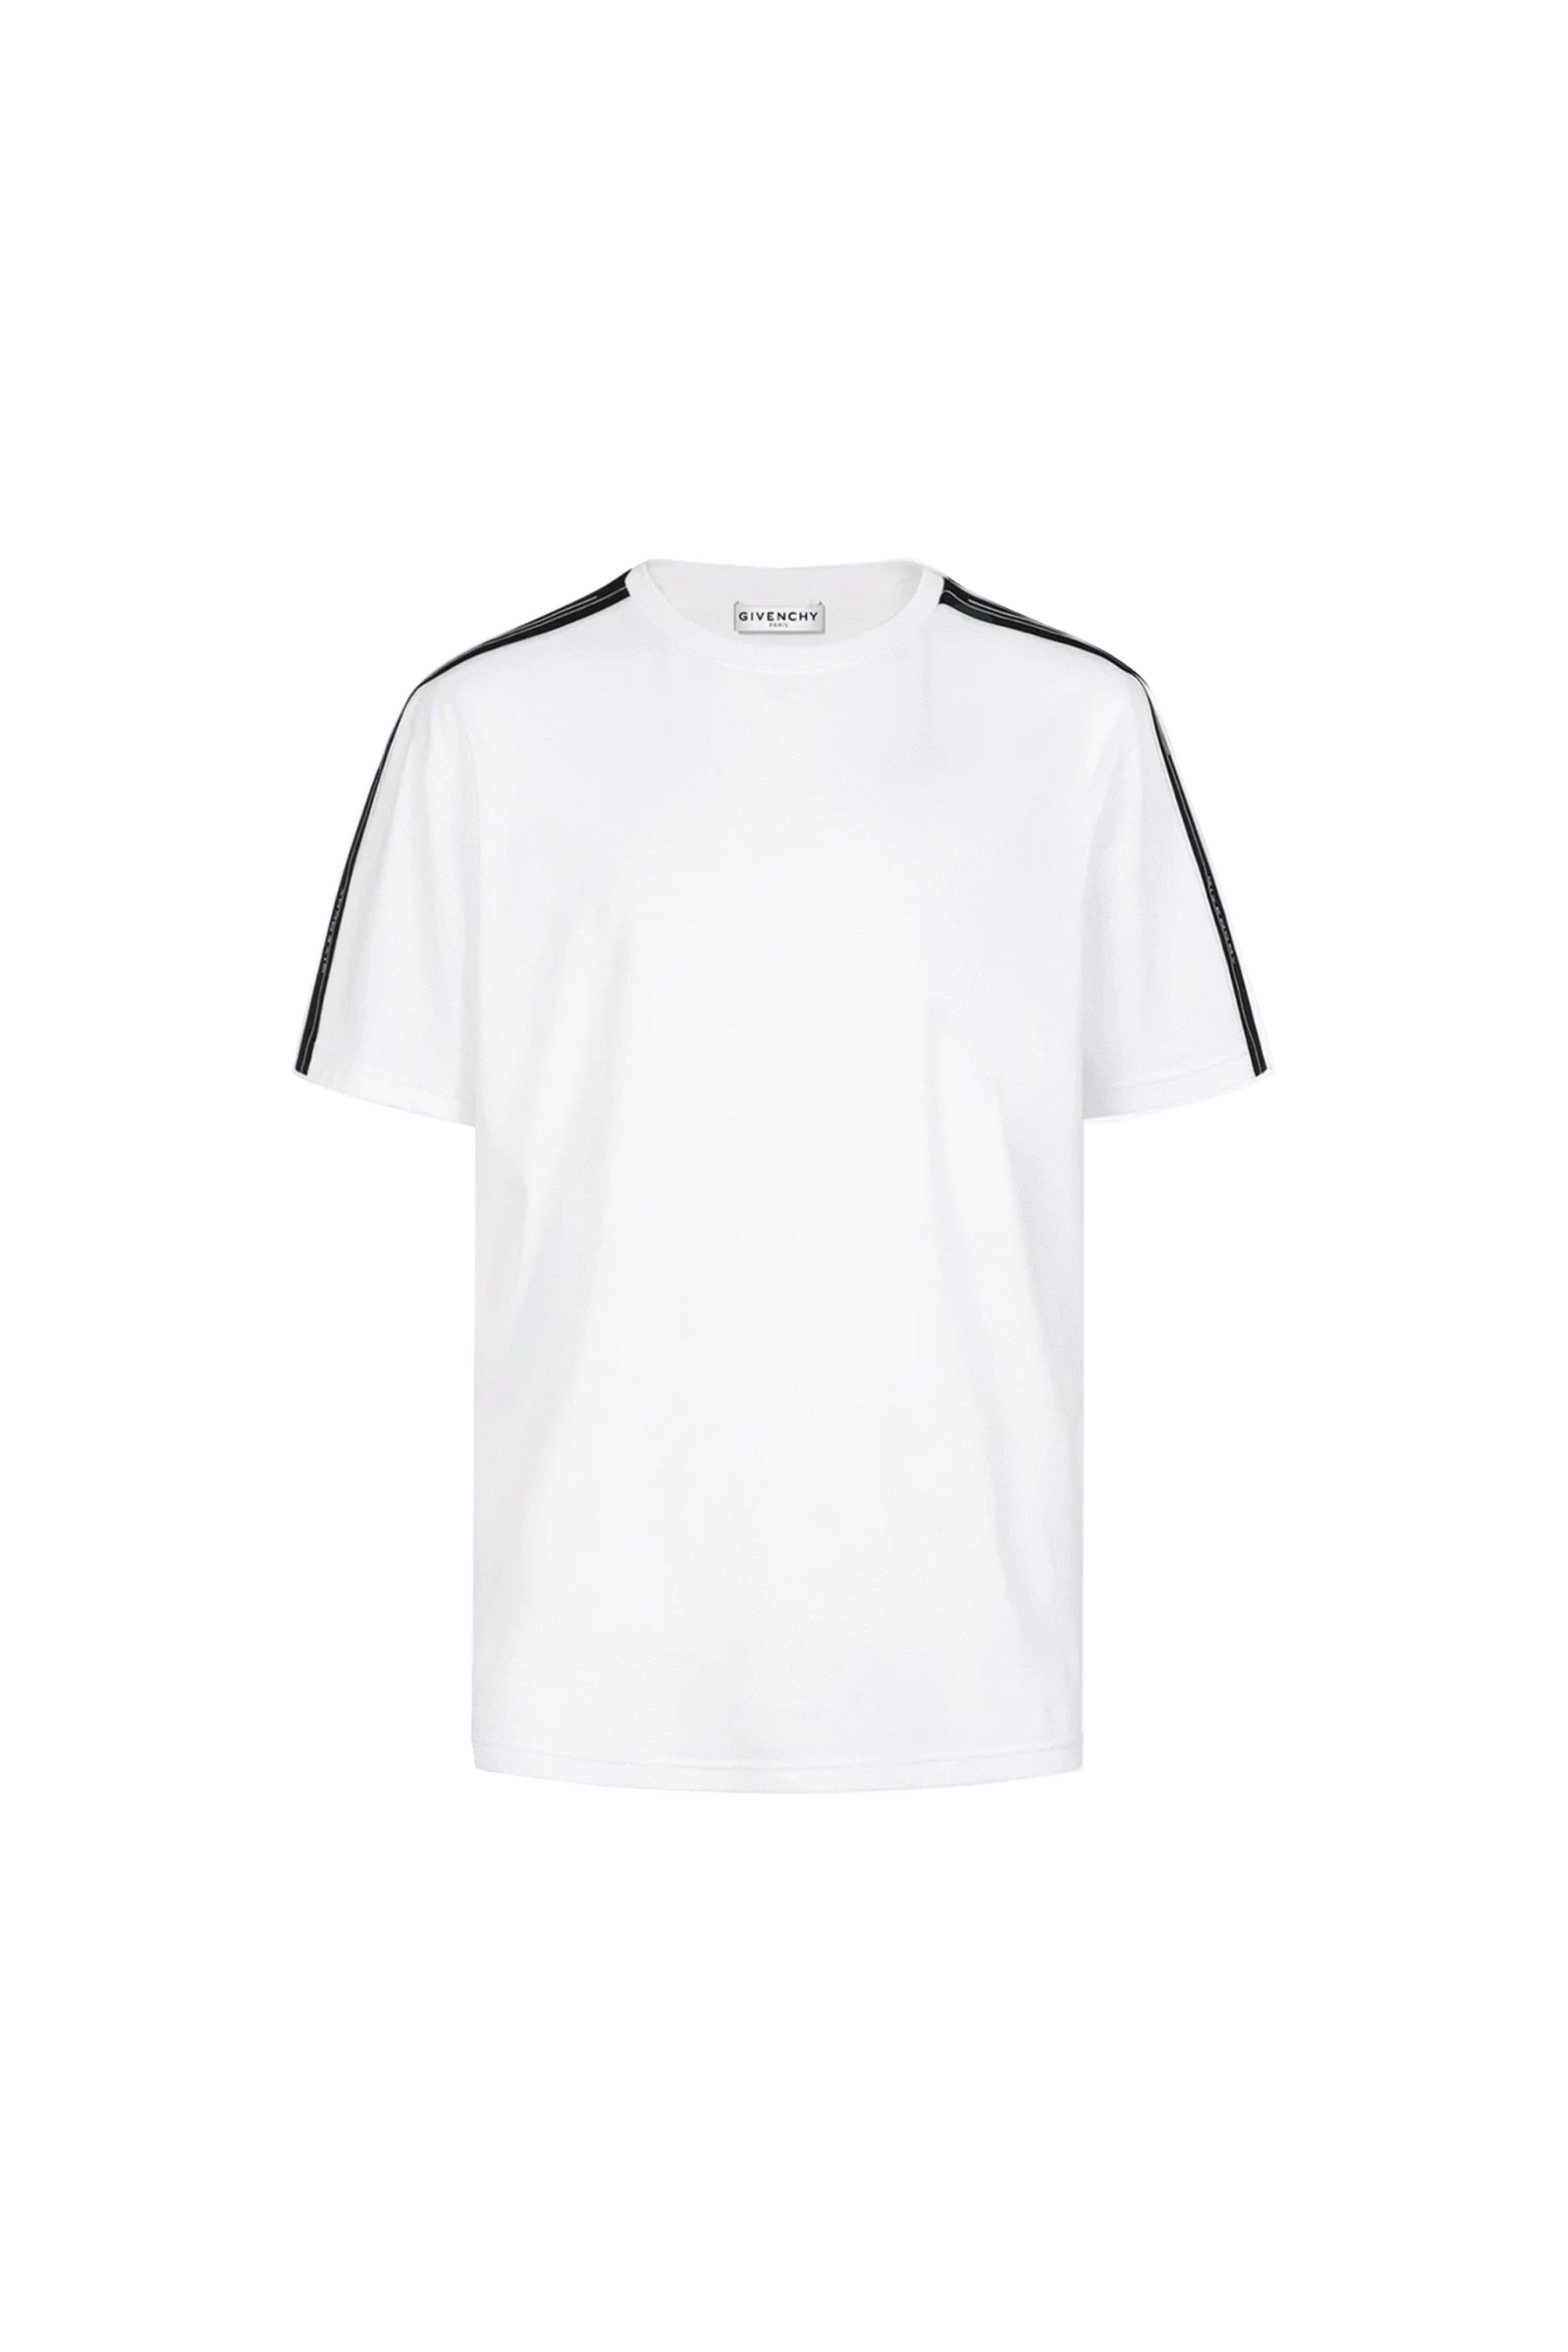 Givenchy T-Shirt Logo White Tape Shoulders